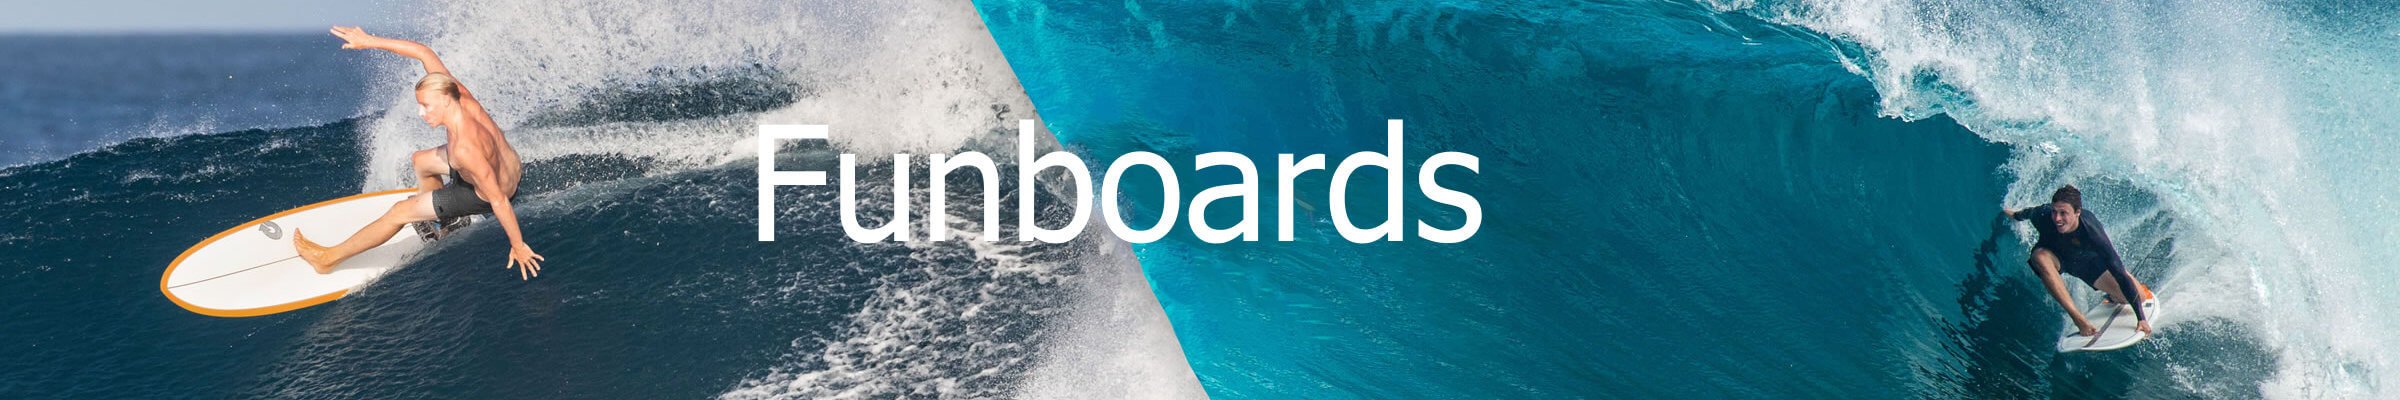 Funboard Guide shopping Advice Surfboard Header